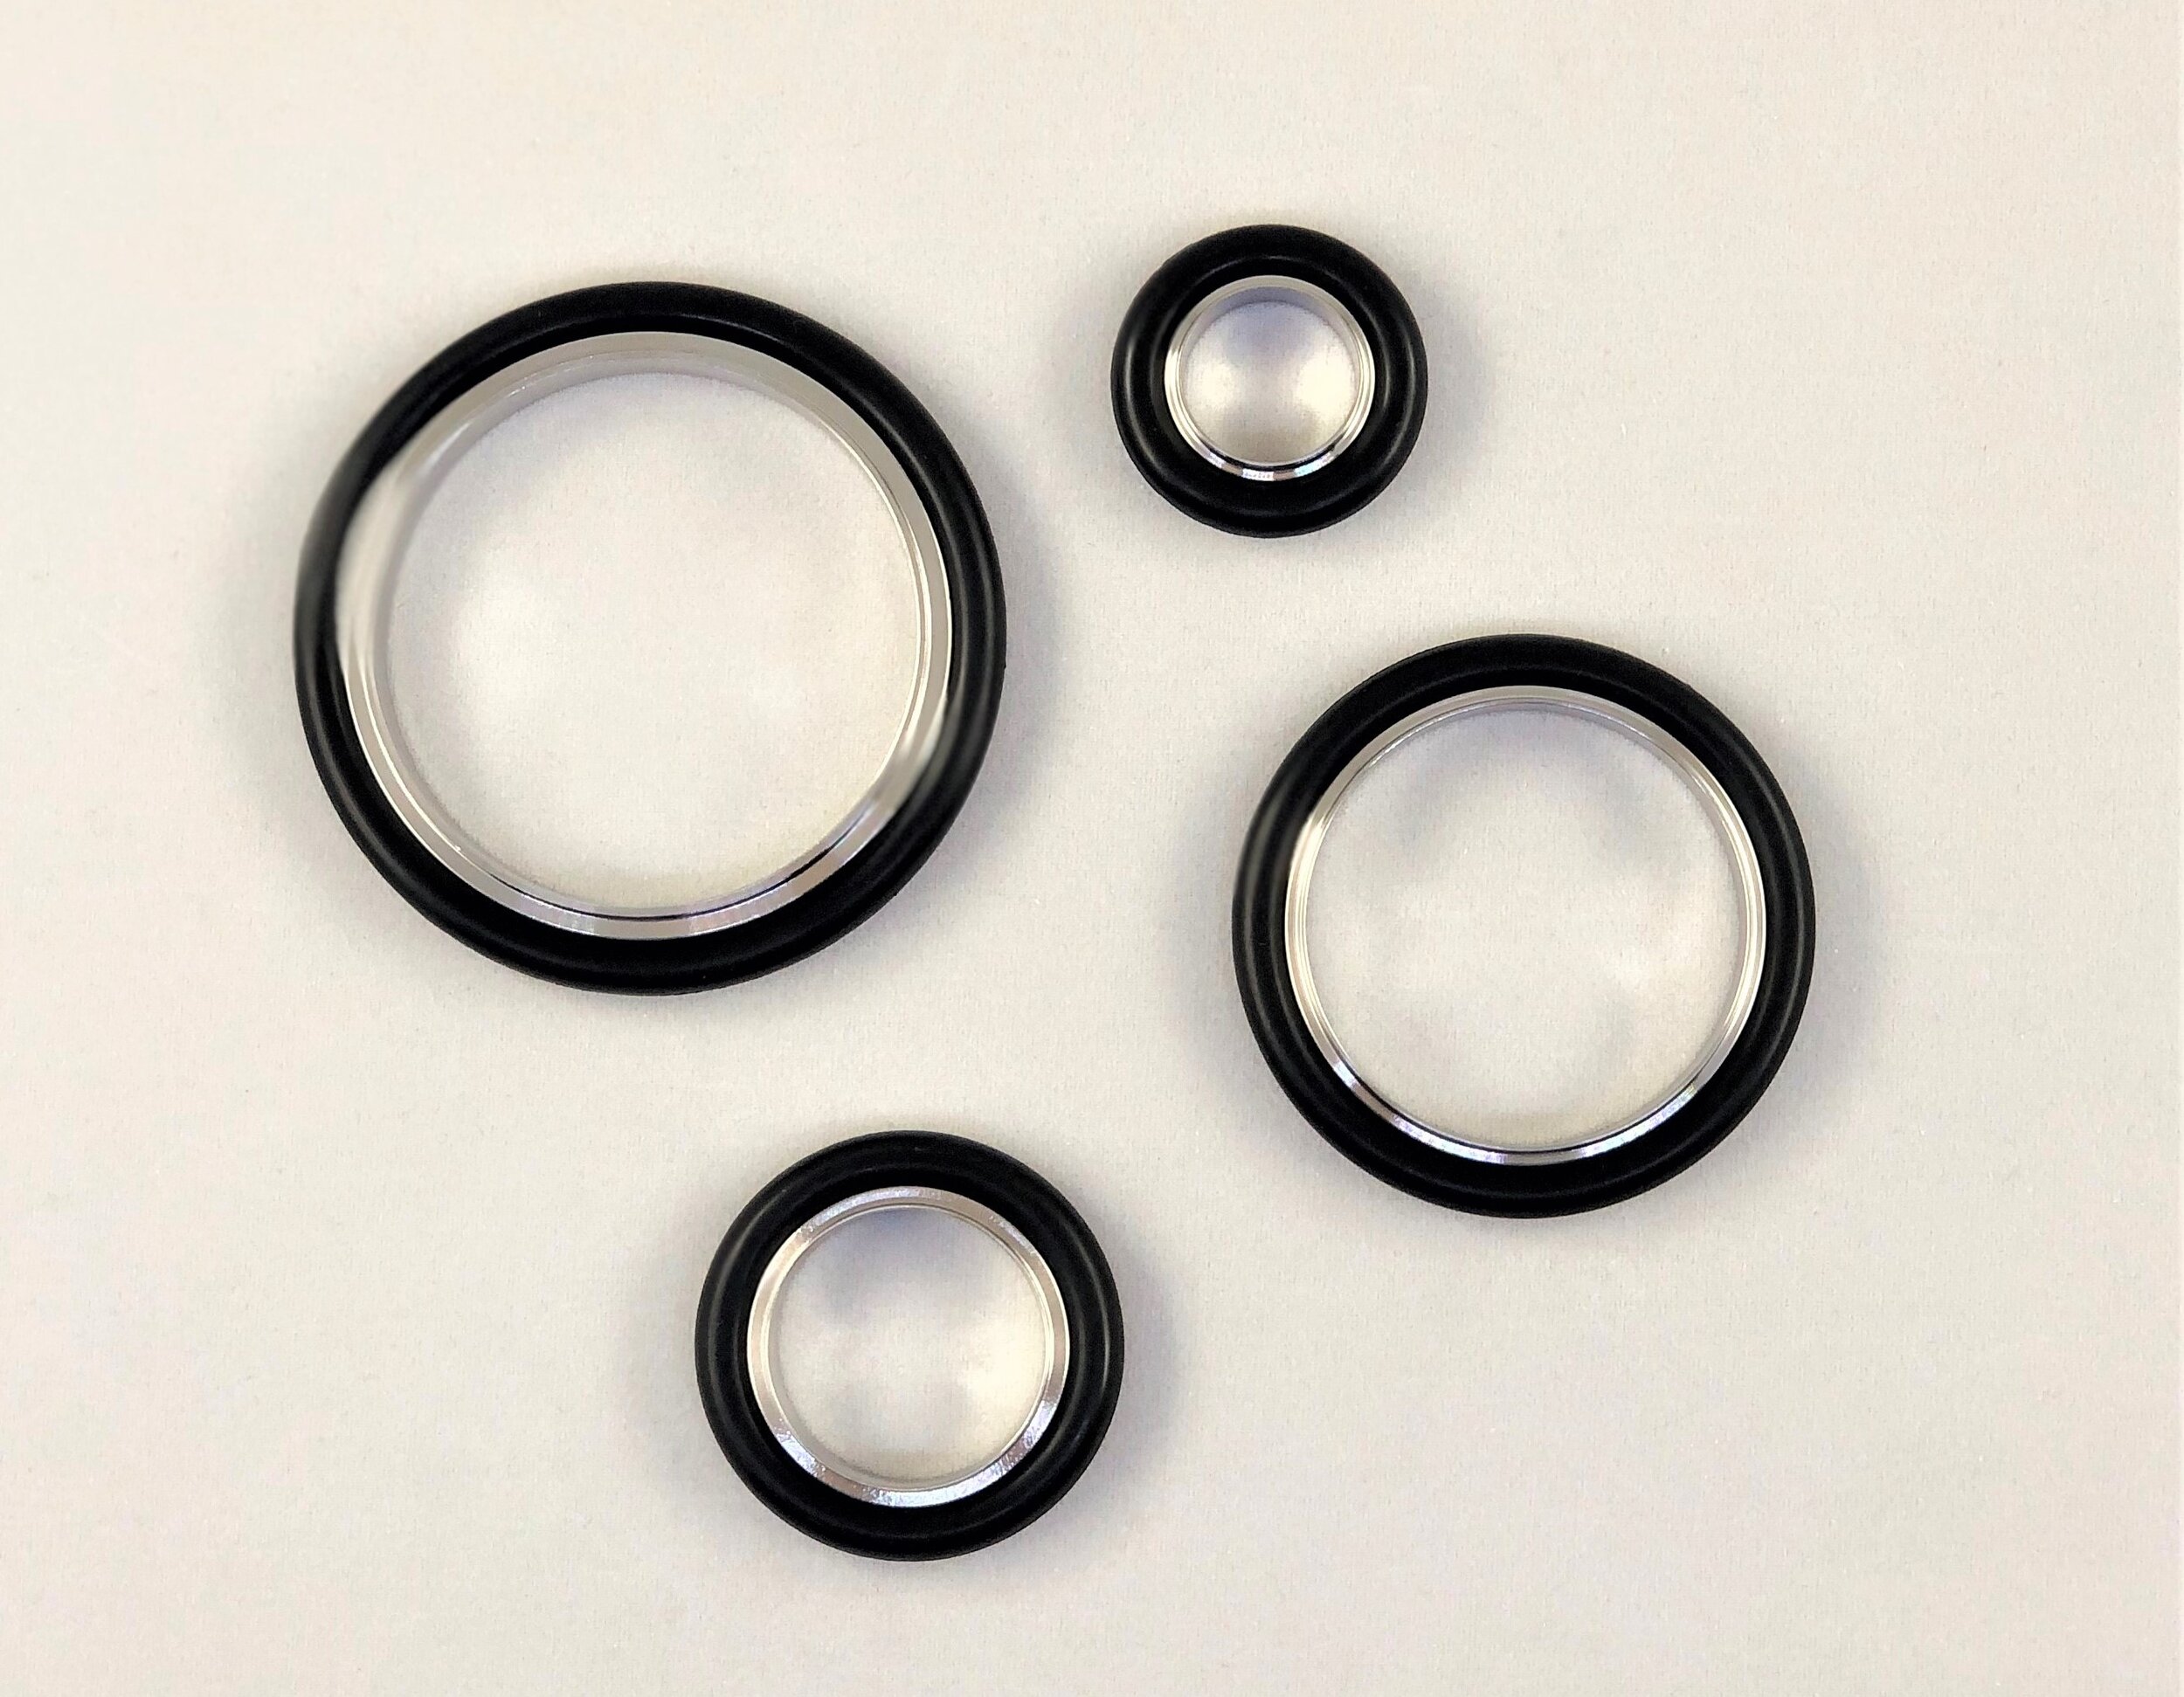 10 Pcs Pack ESTPEN KF NW 16 Centering Ring Aluminum with Viton O-Ring